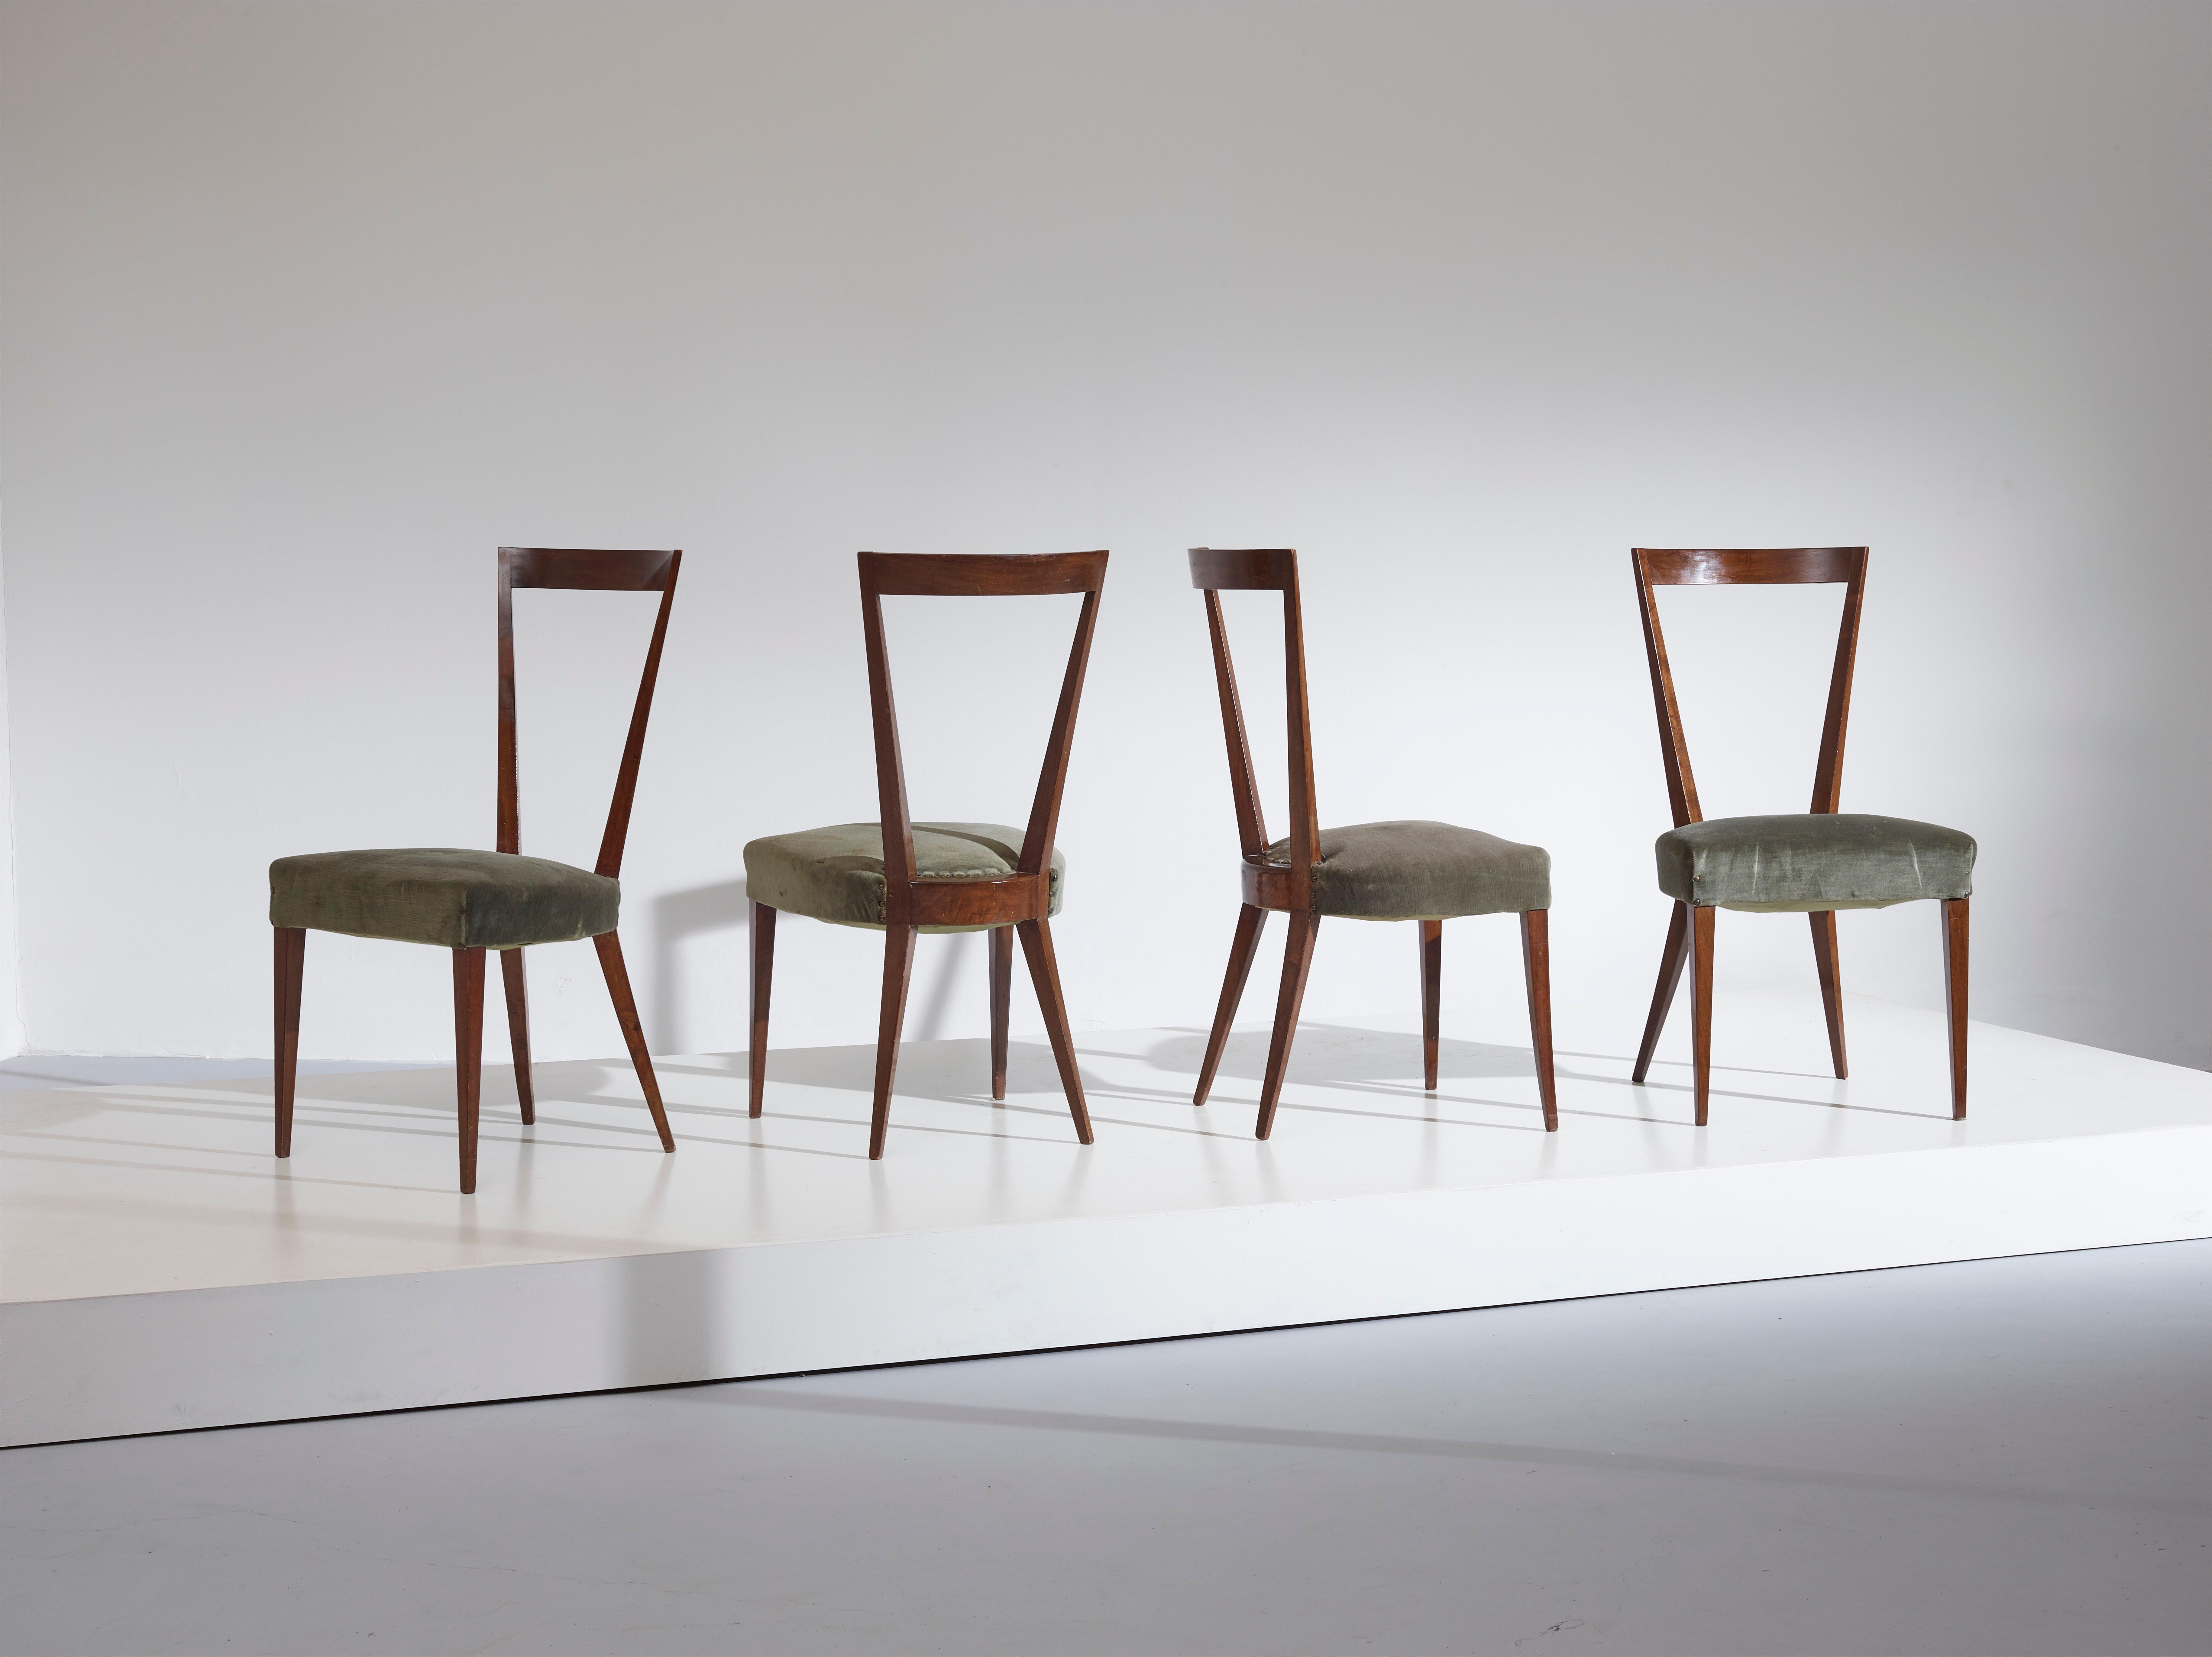 Very rare set of four dining chairs designed in the 1938 by Gio Ponti and produced by Casa e Giardino, Italy.

Classic elegance and modern essentiality are the main traits of the lines of this model which have been developed starting from the